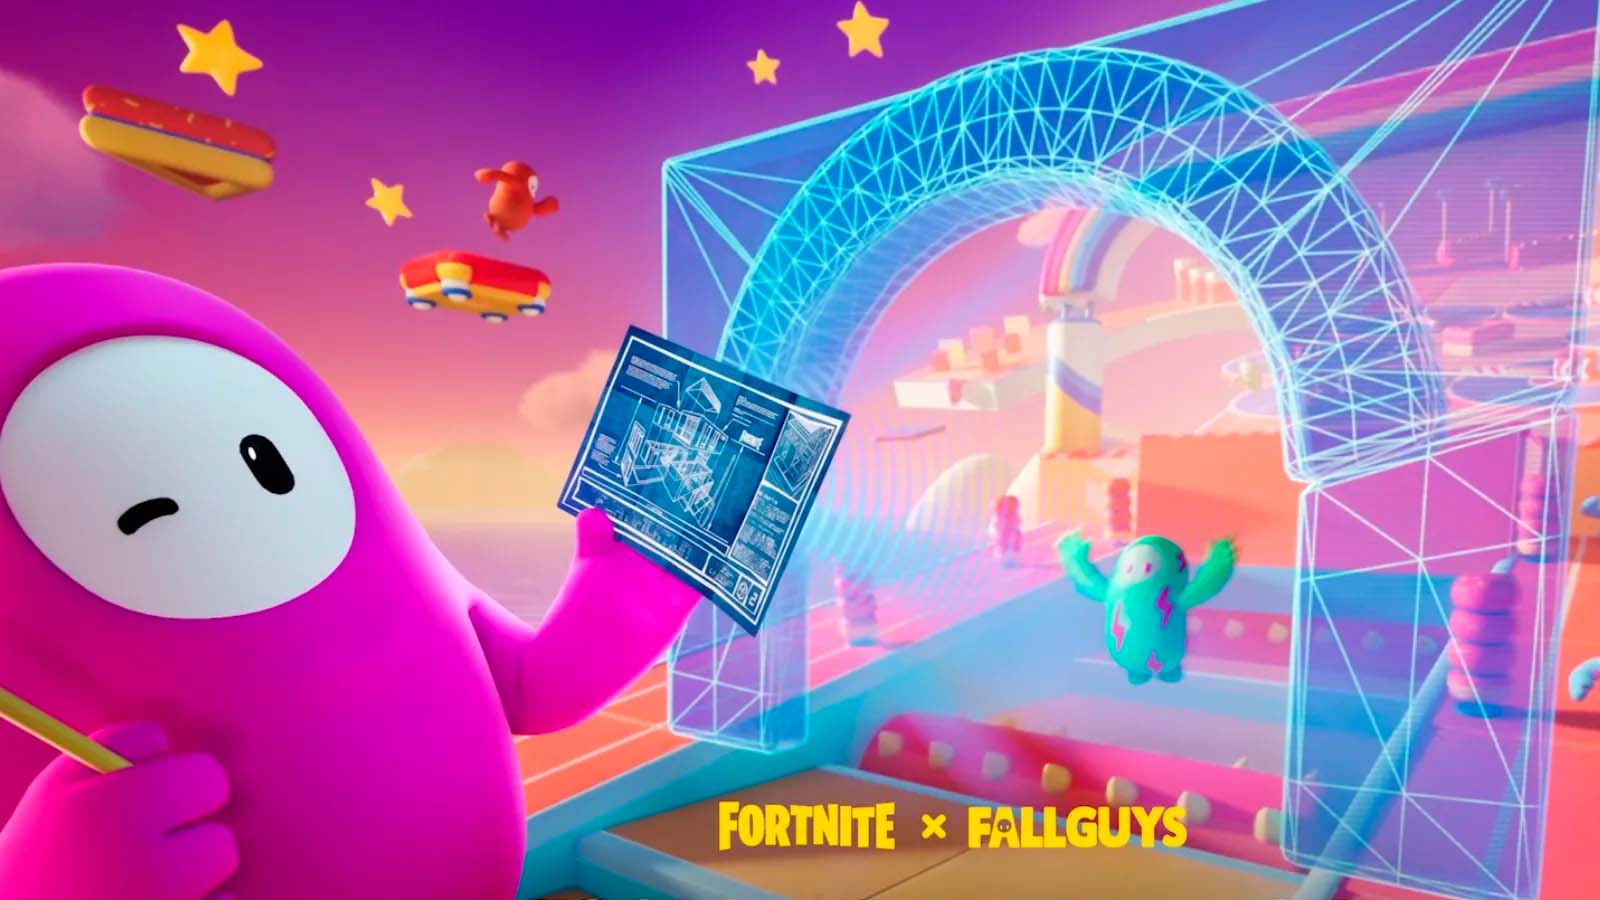 Fortnite Fall Guys promo art with a bean holding a building blueprint